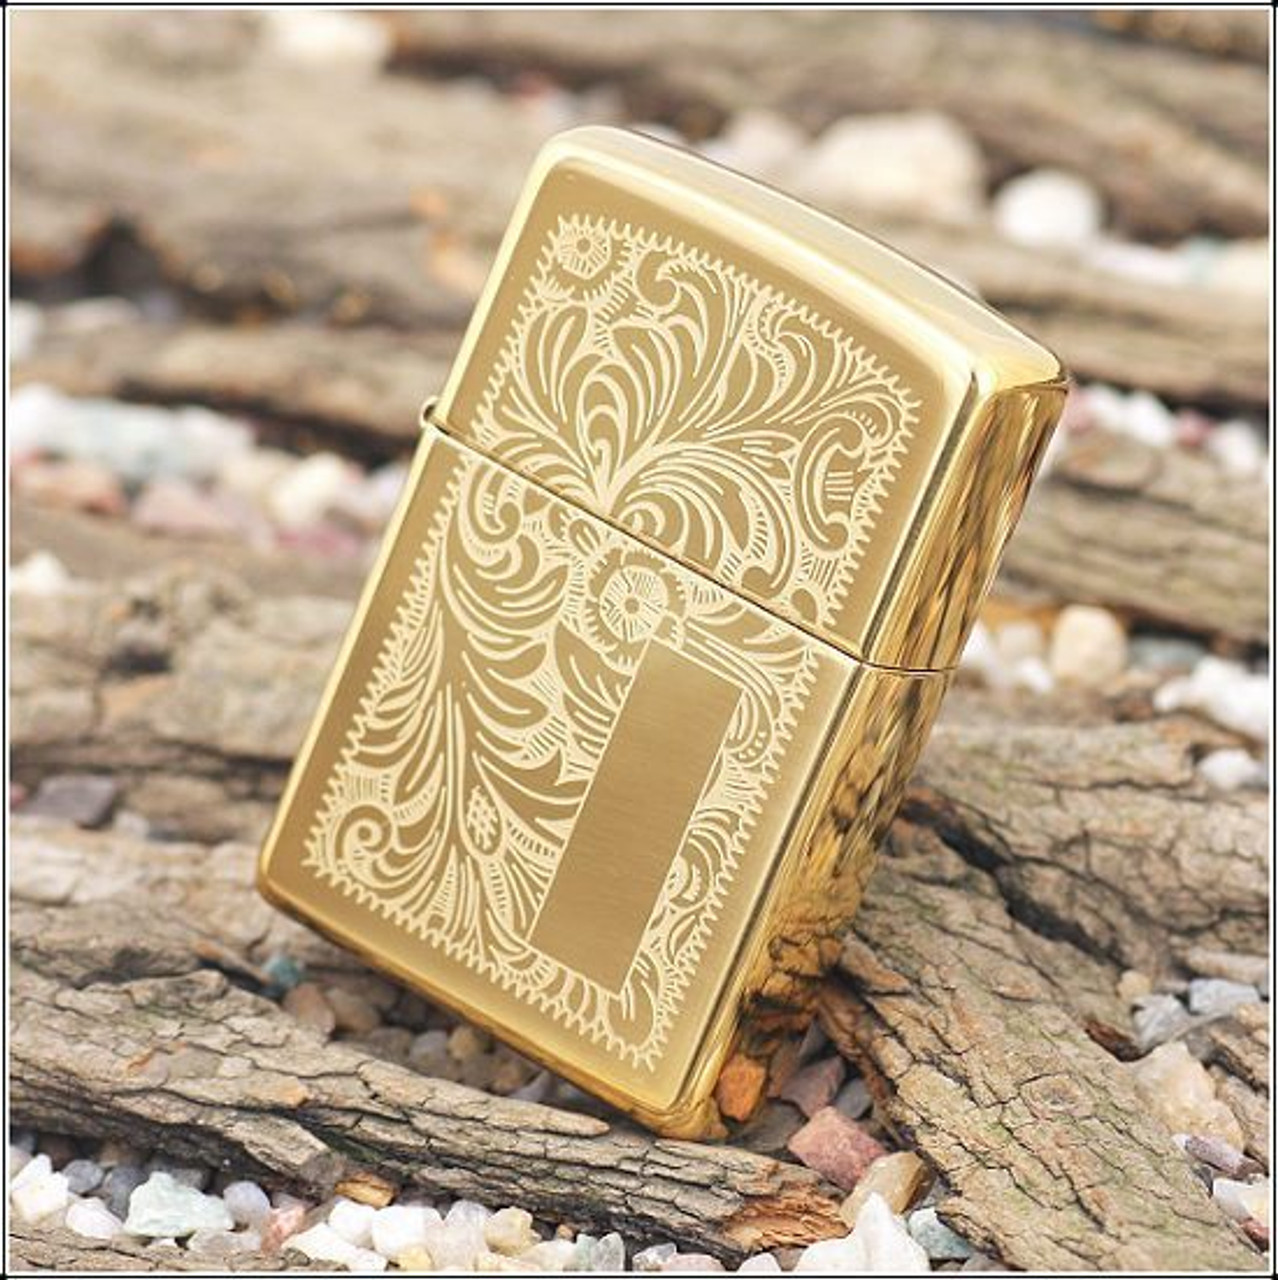 Zippo All-in-One Kit with Brushed Brass Windproof Lighter